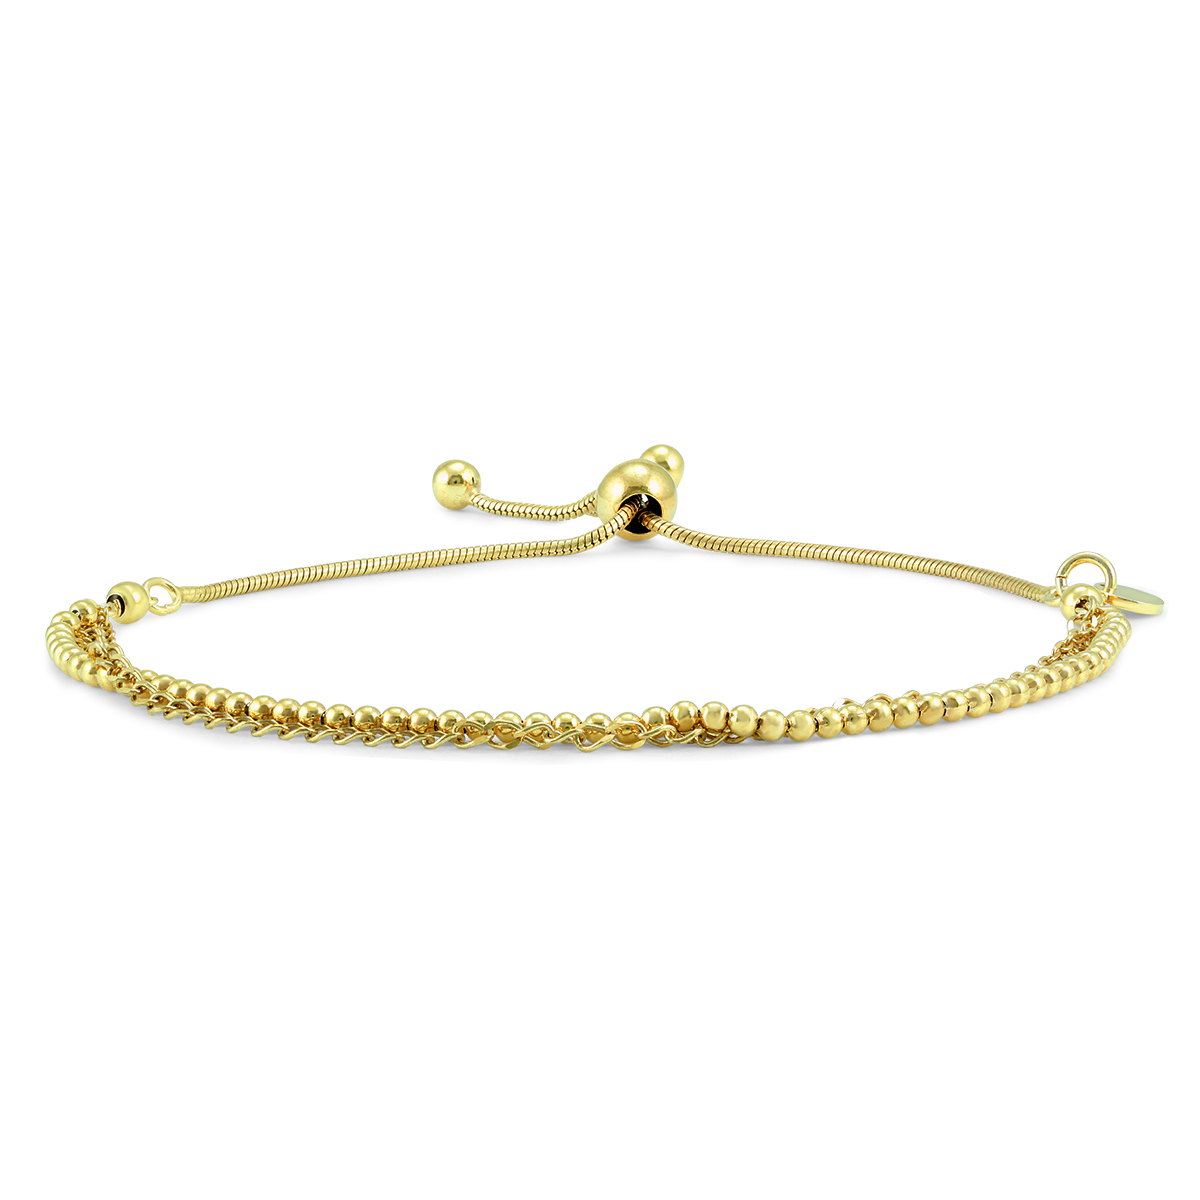 Bead and Chain Bolo Bracelet in Yellow Gold Plated .925 Sterling Silver